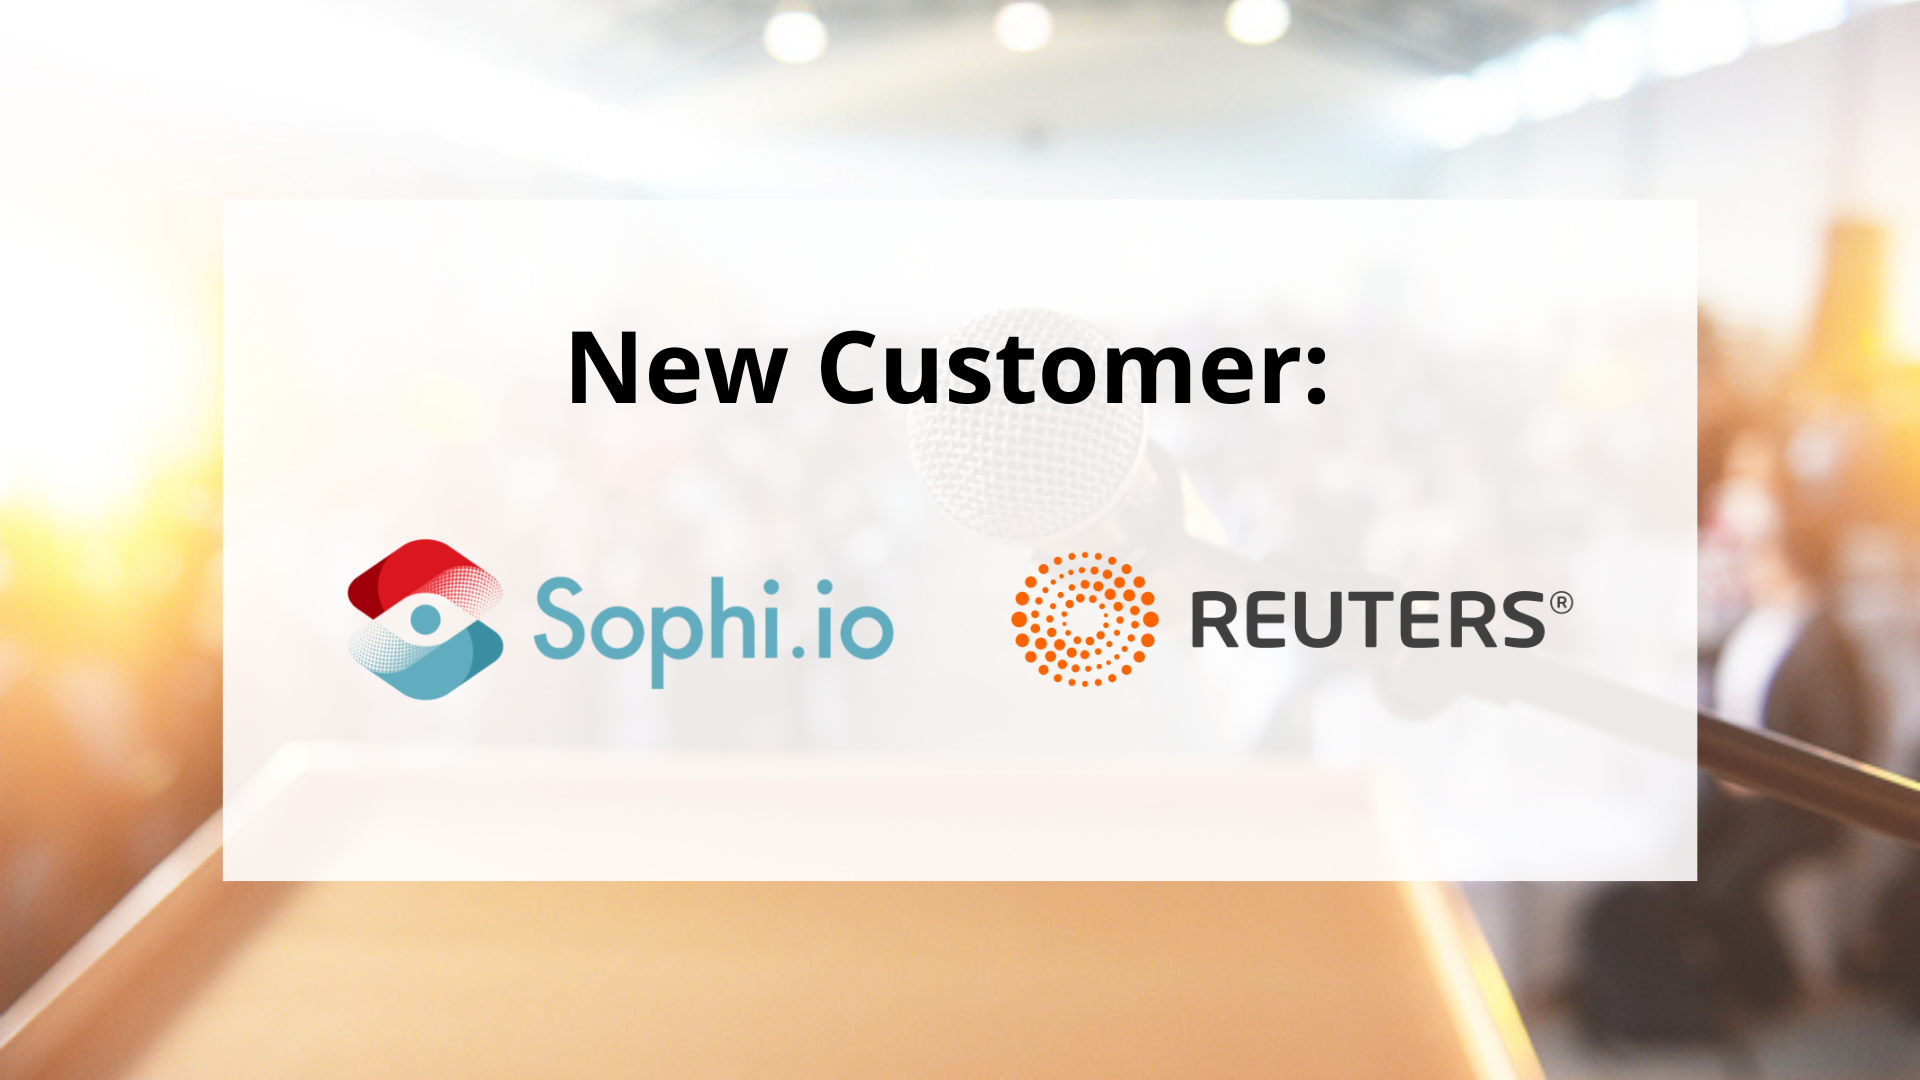 Reuters is a new Sophi.io Customer